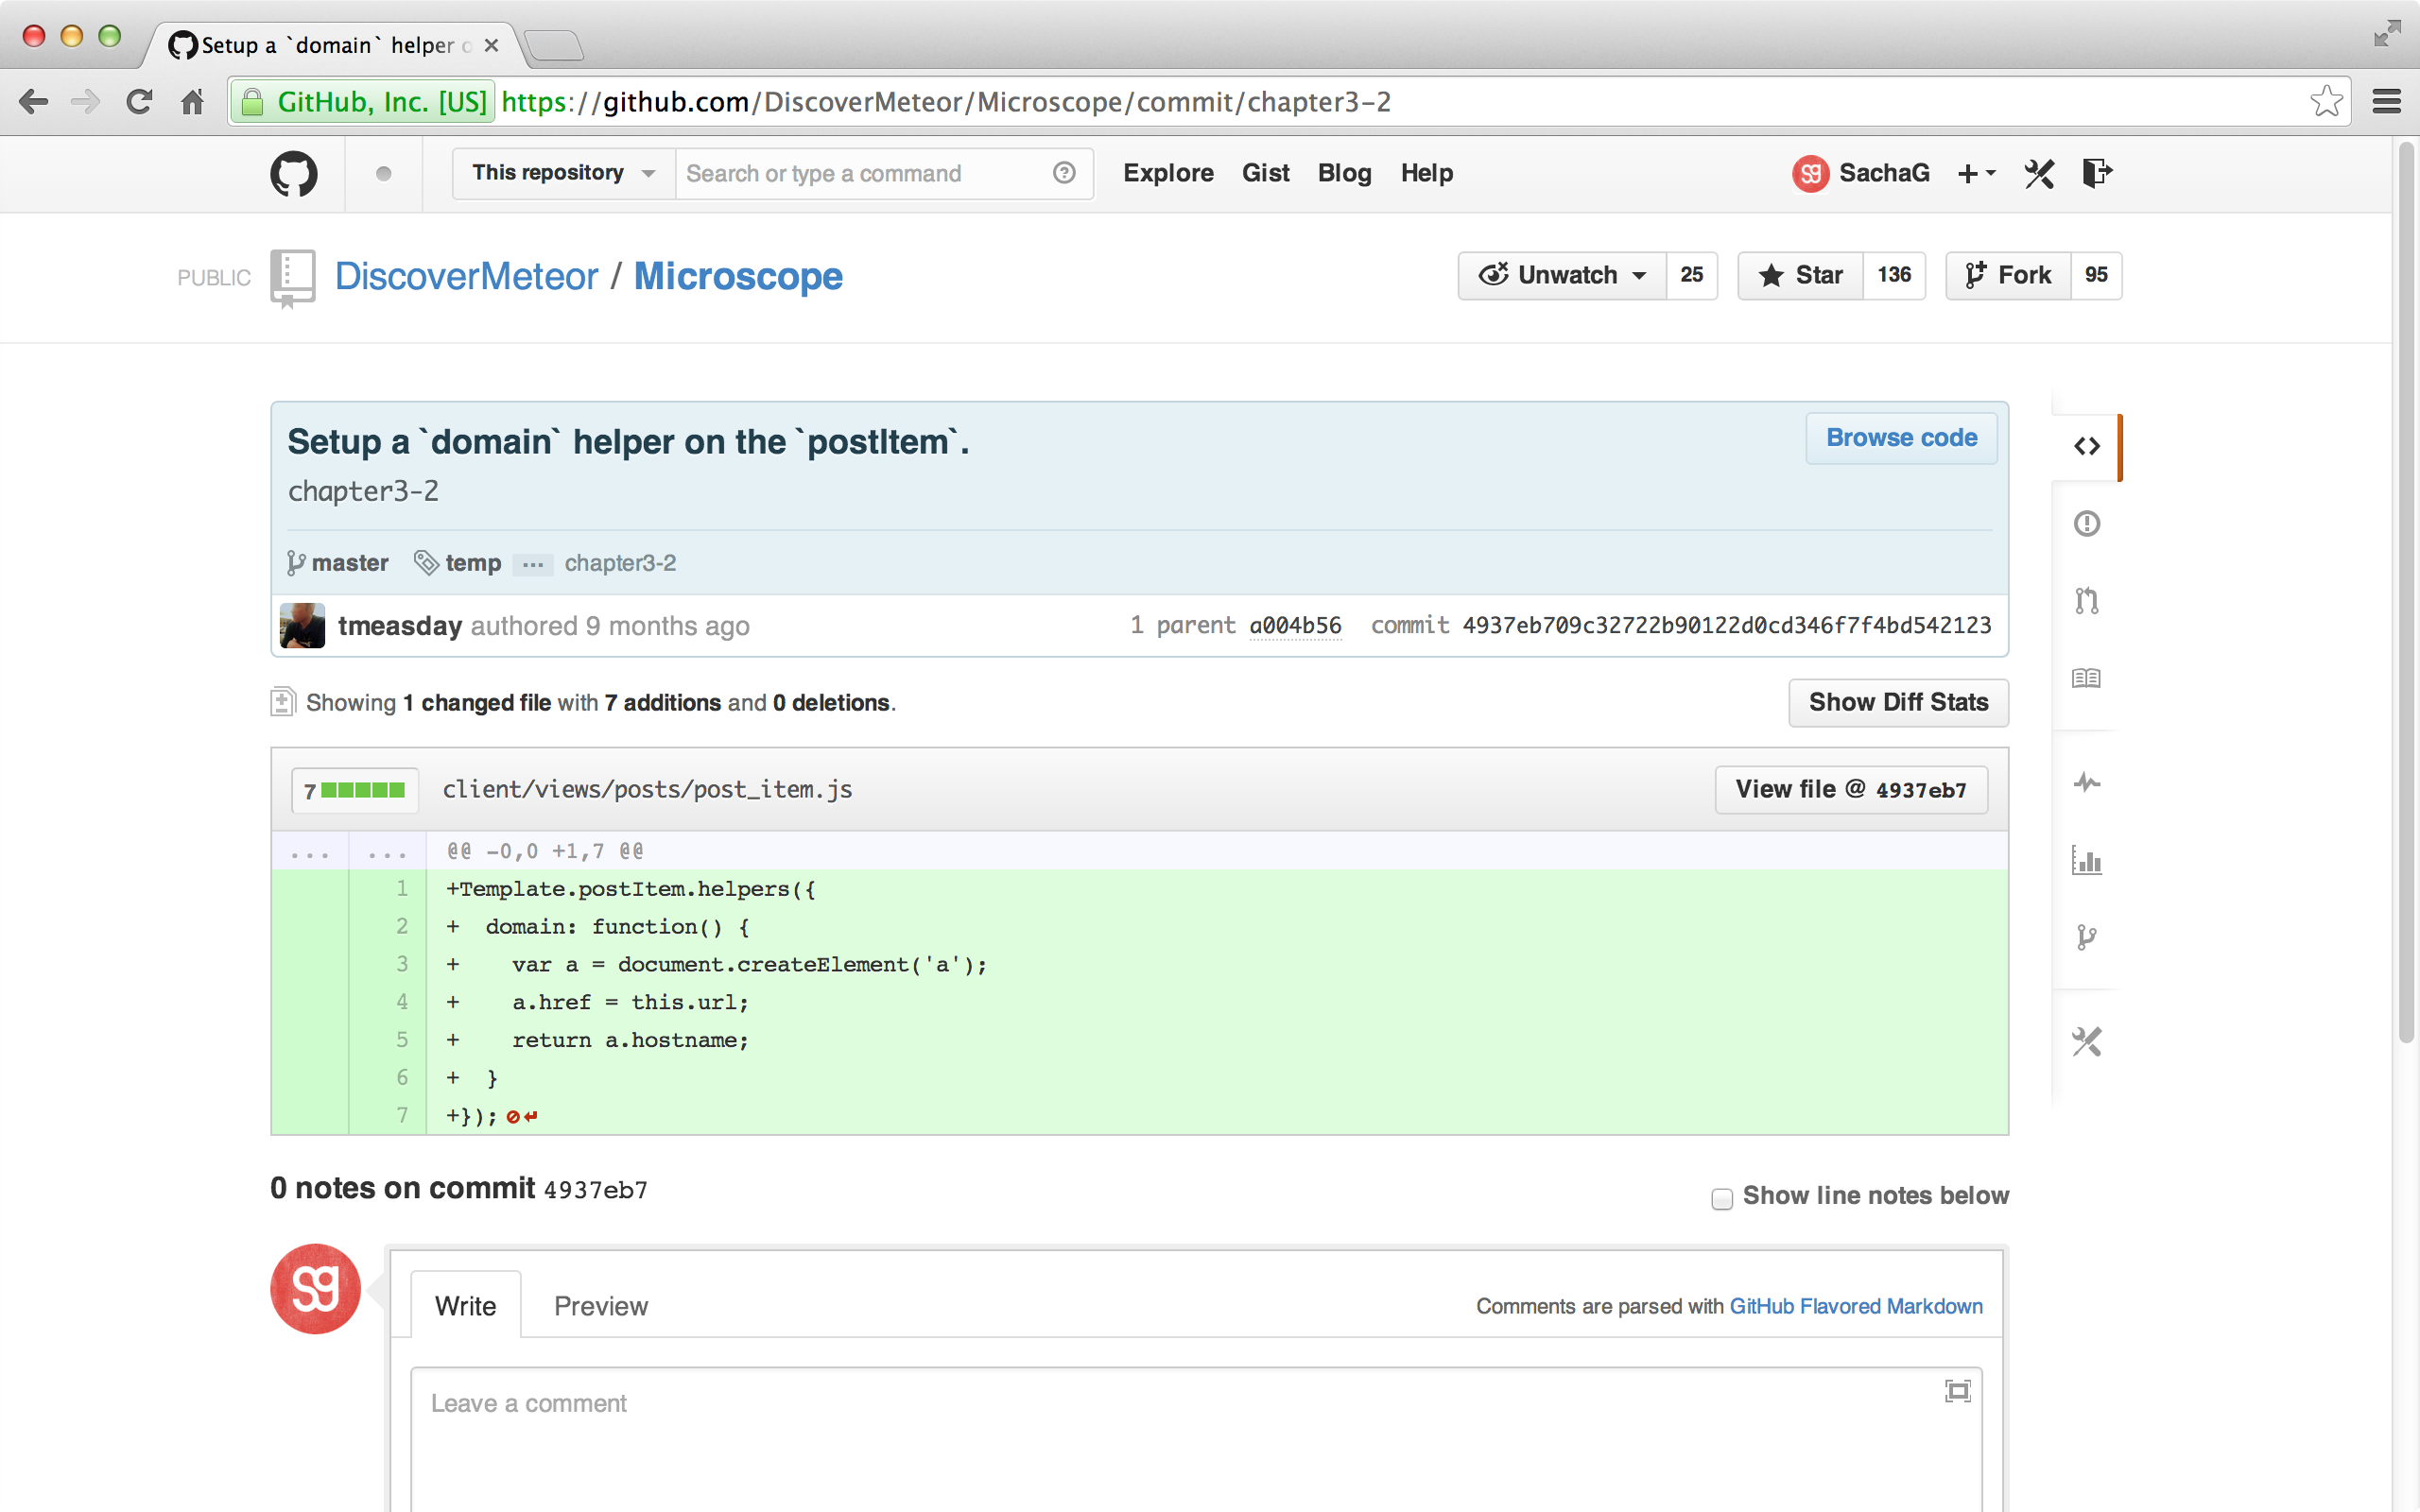 A Git commit as shown on GitHub